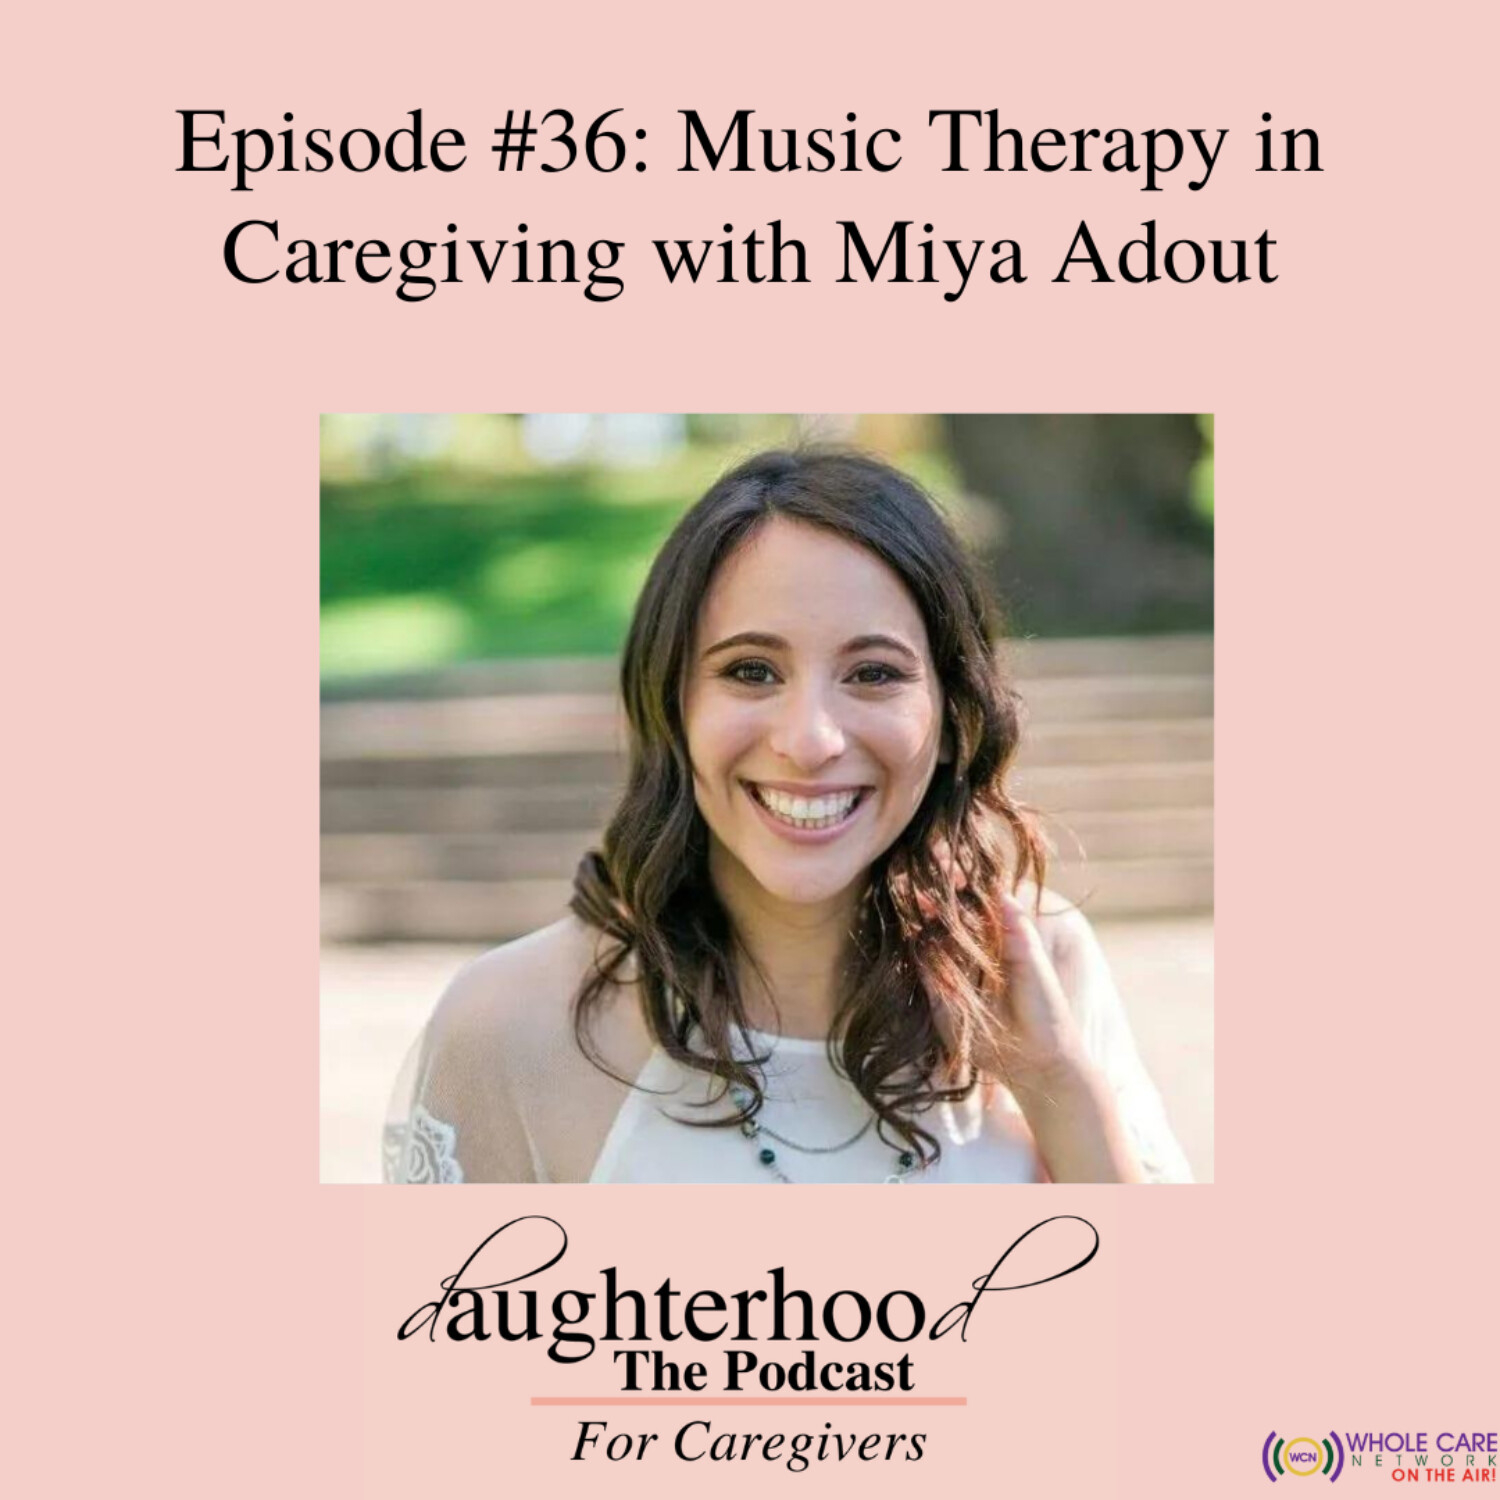 Music Therapy in Caregiving with Miya Adout